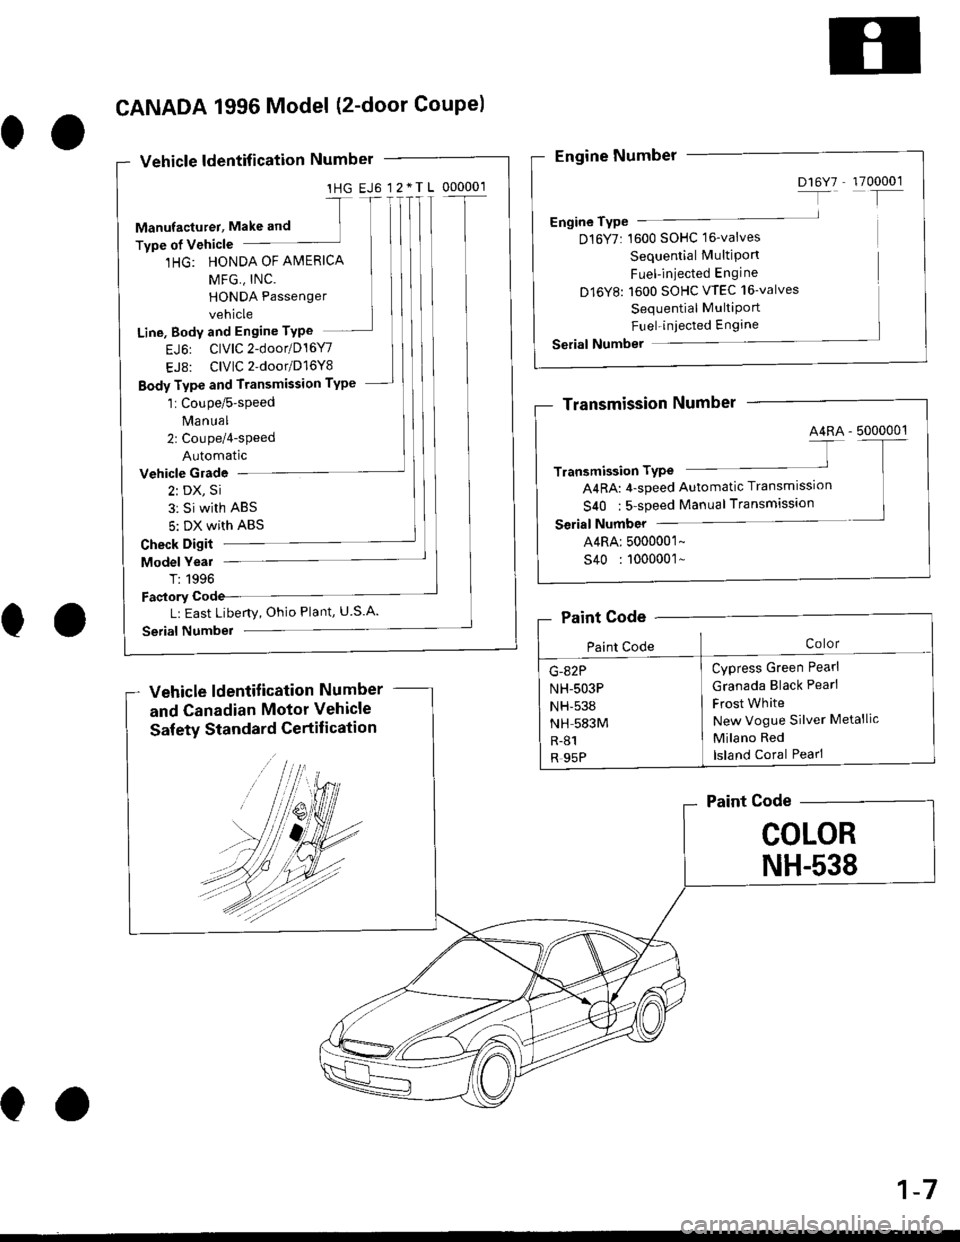 HONDA CIVIC 1996 6.G Workshop Manual 1HG EJ6 12.TL 000001
Line, Body and Engine TYPe
EJ6: ClVlC2-door/D16Y7
EJ8: ClVlC2door/D16Y8
Body Type and Transmission TYPe
Vehicle Glade
2: DX, Si
3: Si with ABS
5: DX with ABS
Check Digit
Model Ye